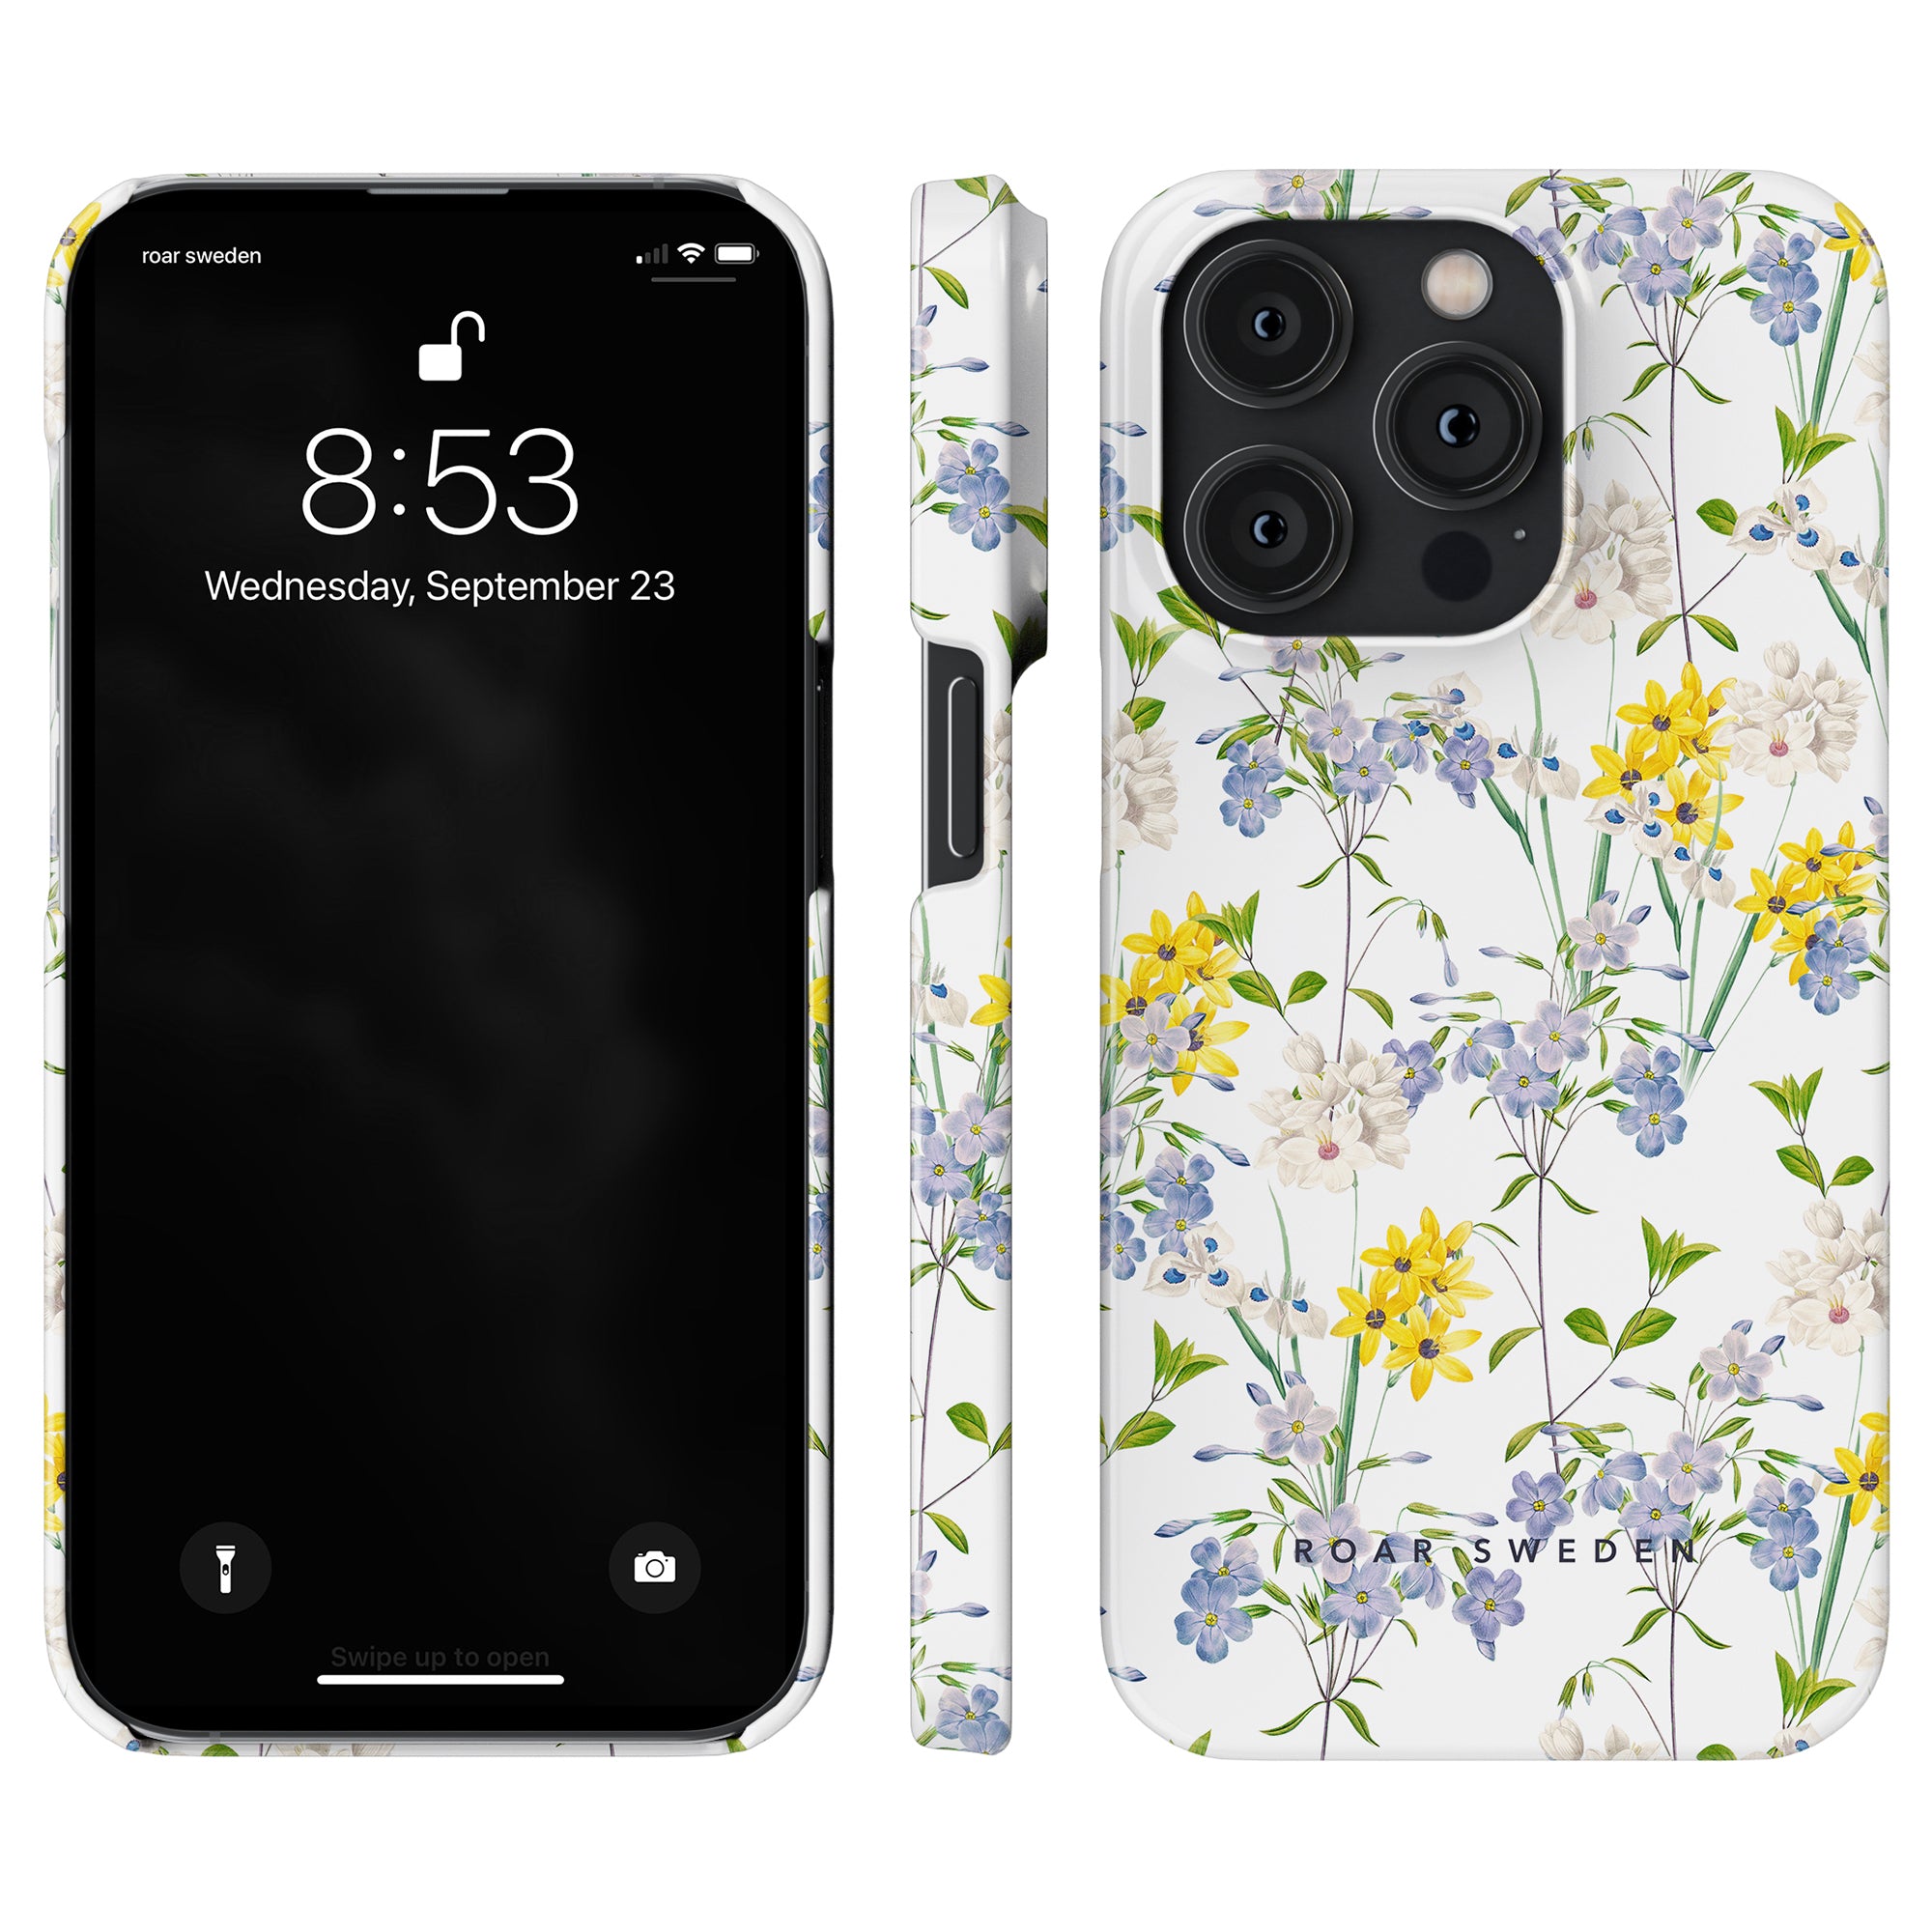 Summer Flowers - Slim case, durable smartphone with a floral case design displayed from the front, side, and back.